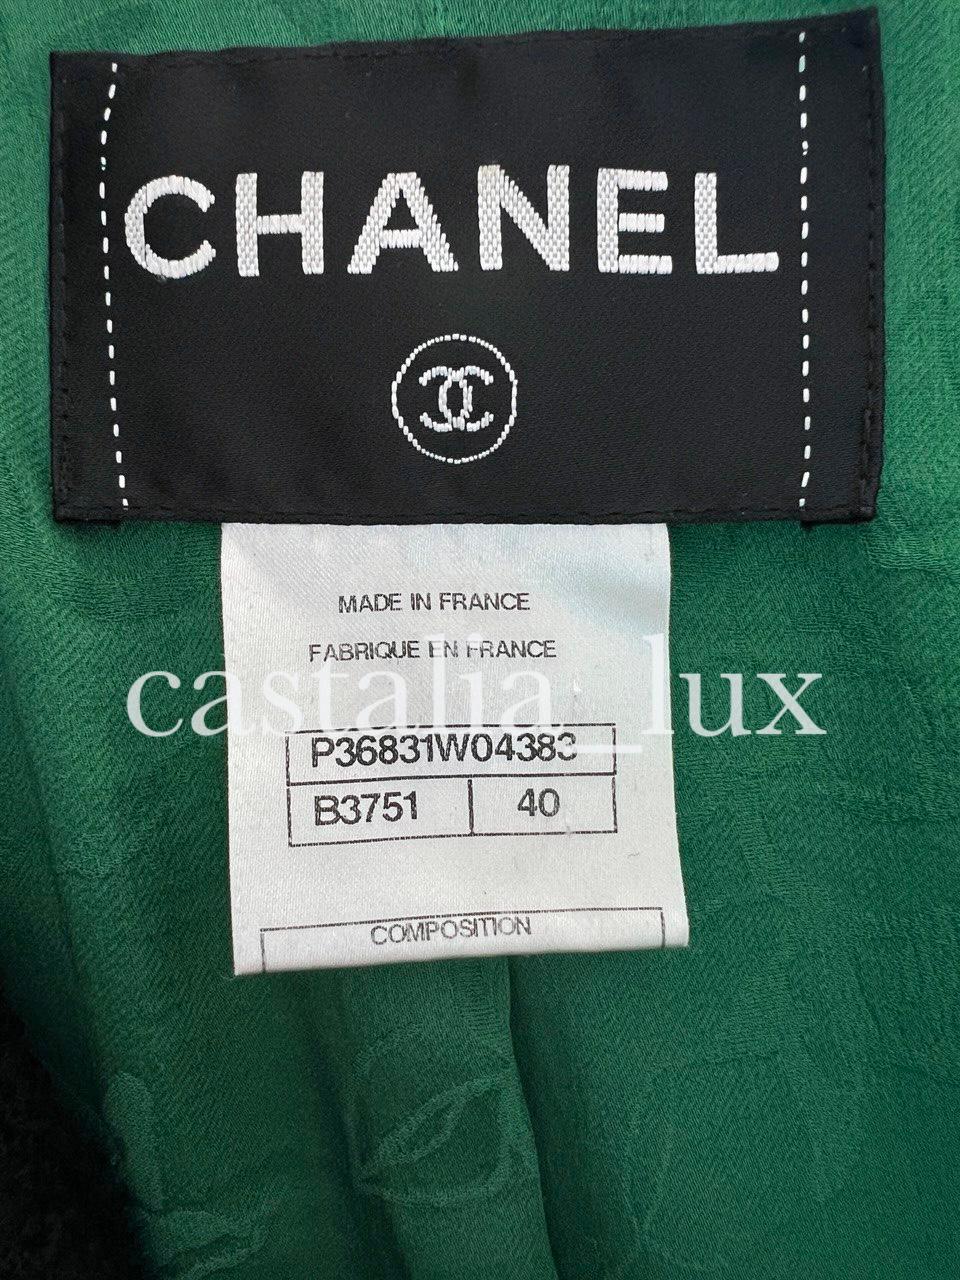 Chanel Extremely Rare Emerald Green Lesage Tweed Jacket 15